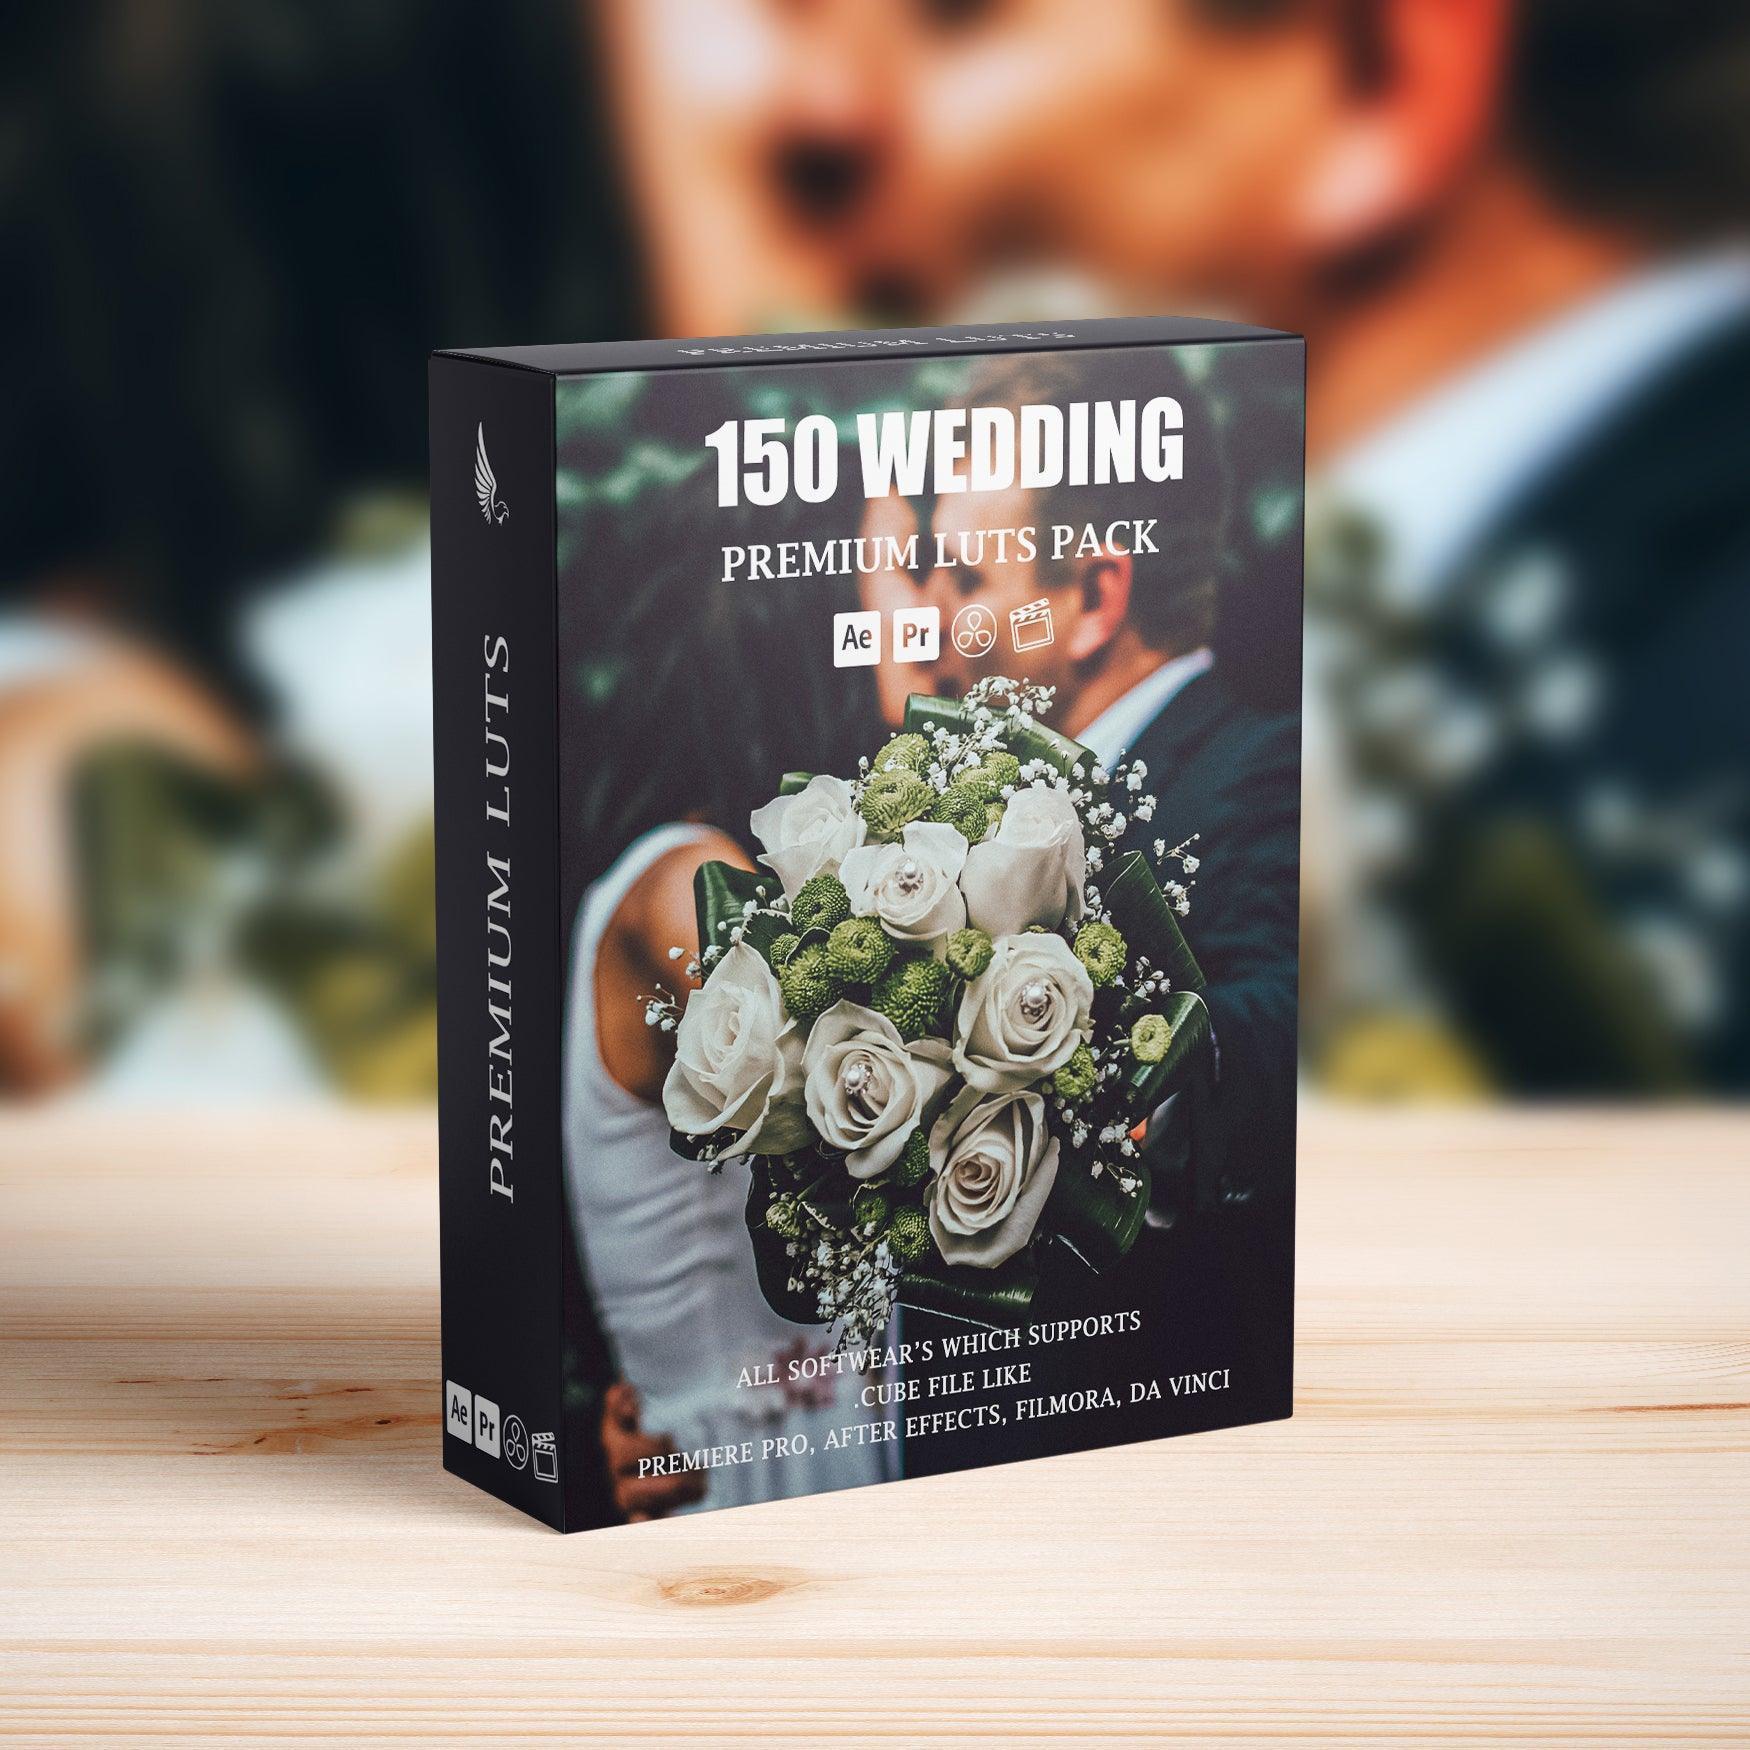 150+ Wedding LUTs for Final Cut, Premiere Pro & Resolve - Cinematic LUTs Pack, Color Grading Video Presets, Luts For Premier Pro Final Cut Pro, Premium FILM LUTs, Premium LUTs, wedding luts - aaapresets.com